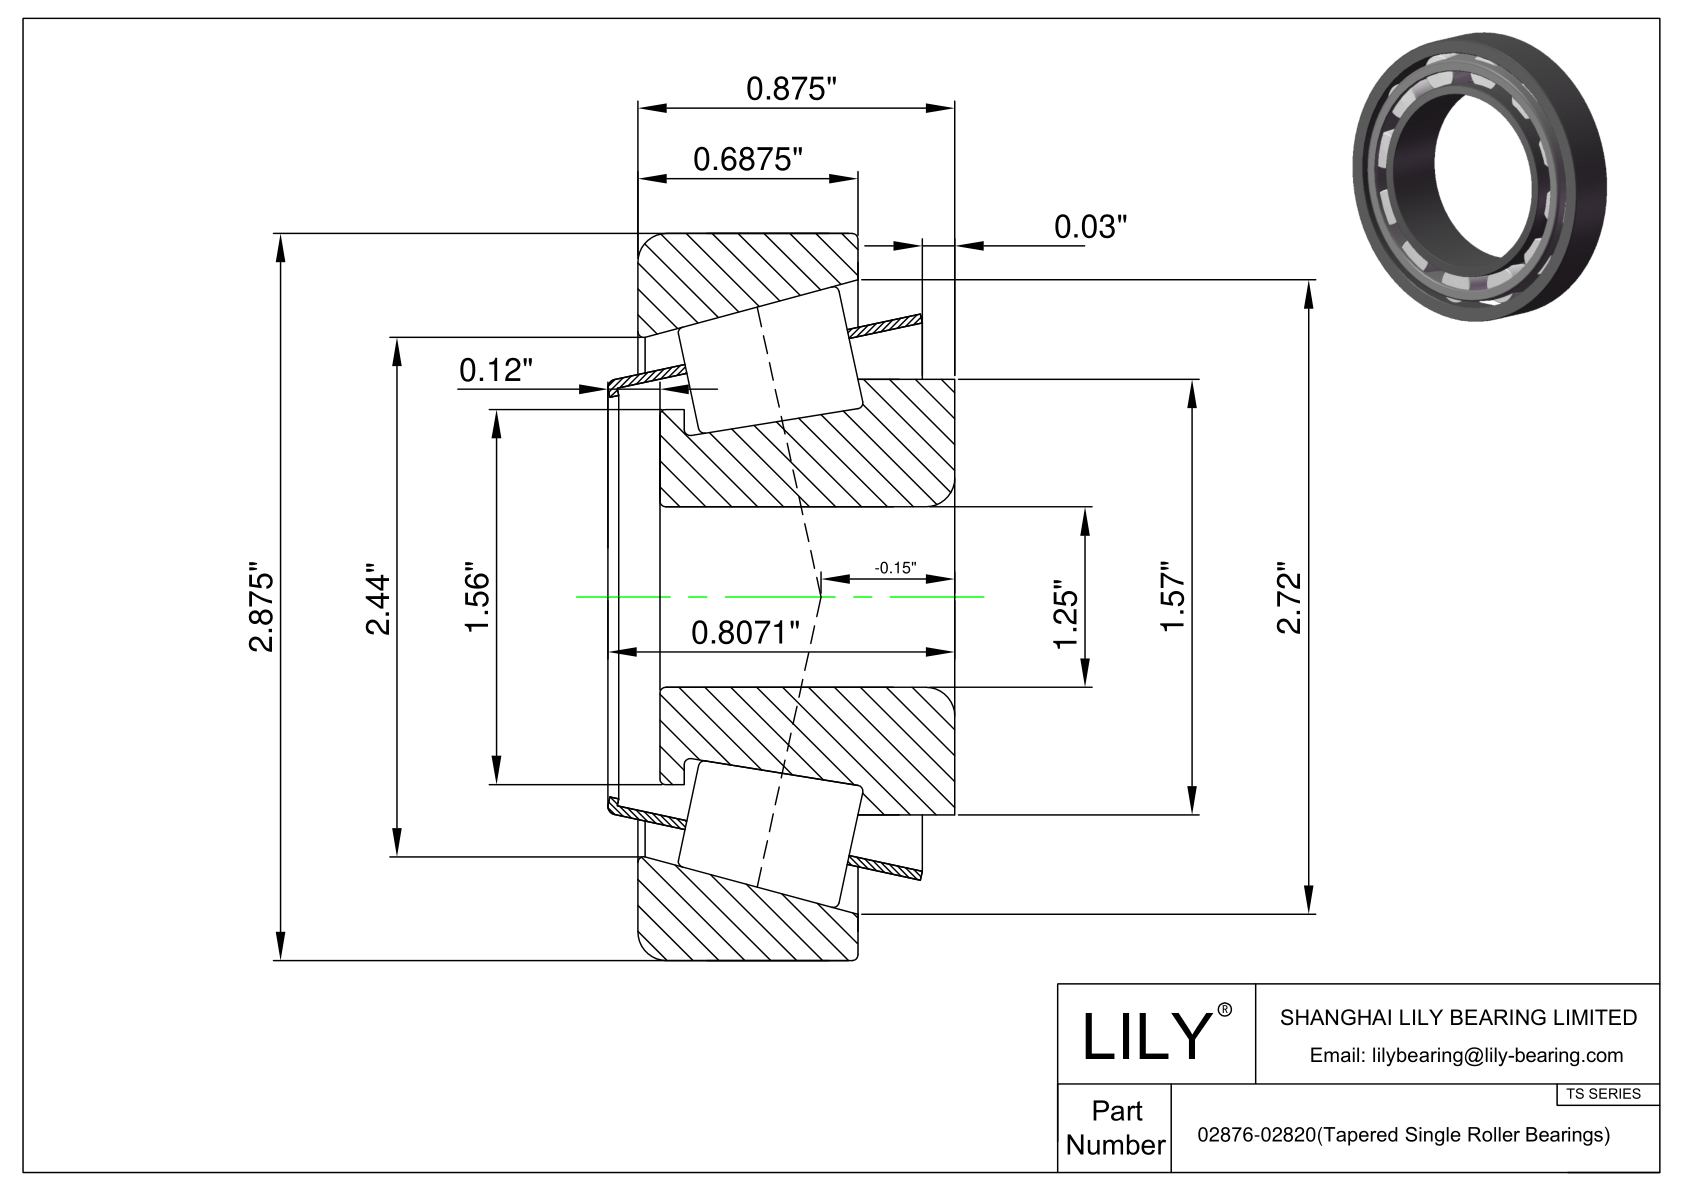 02876-02820 TS (Tapered Single Roller Bearings) (Imperial) cad drawing